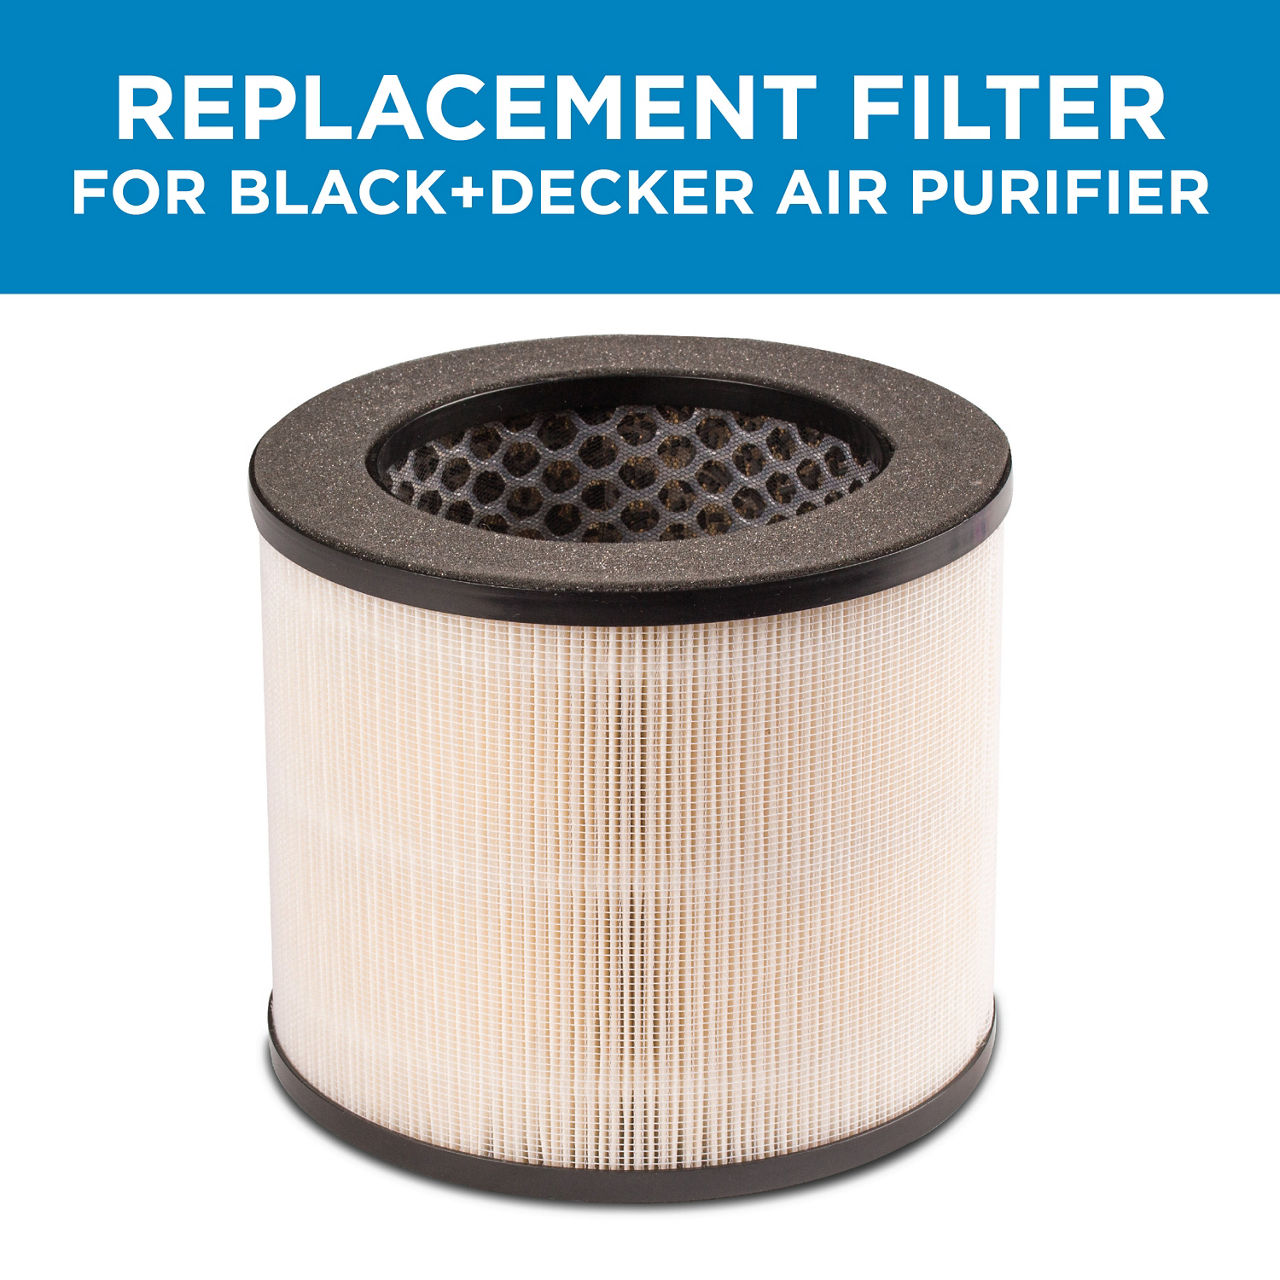 Black + Decker Replacement 3-Stage HEPA Filter